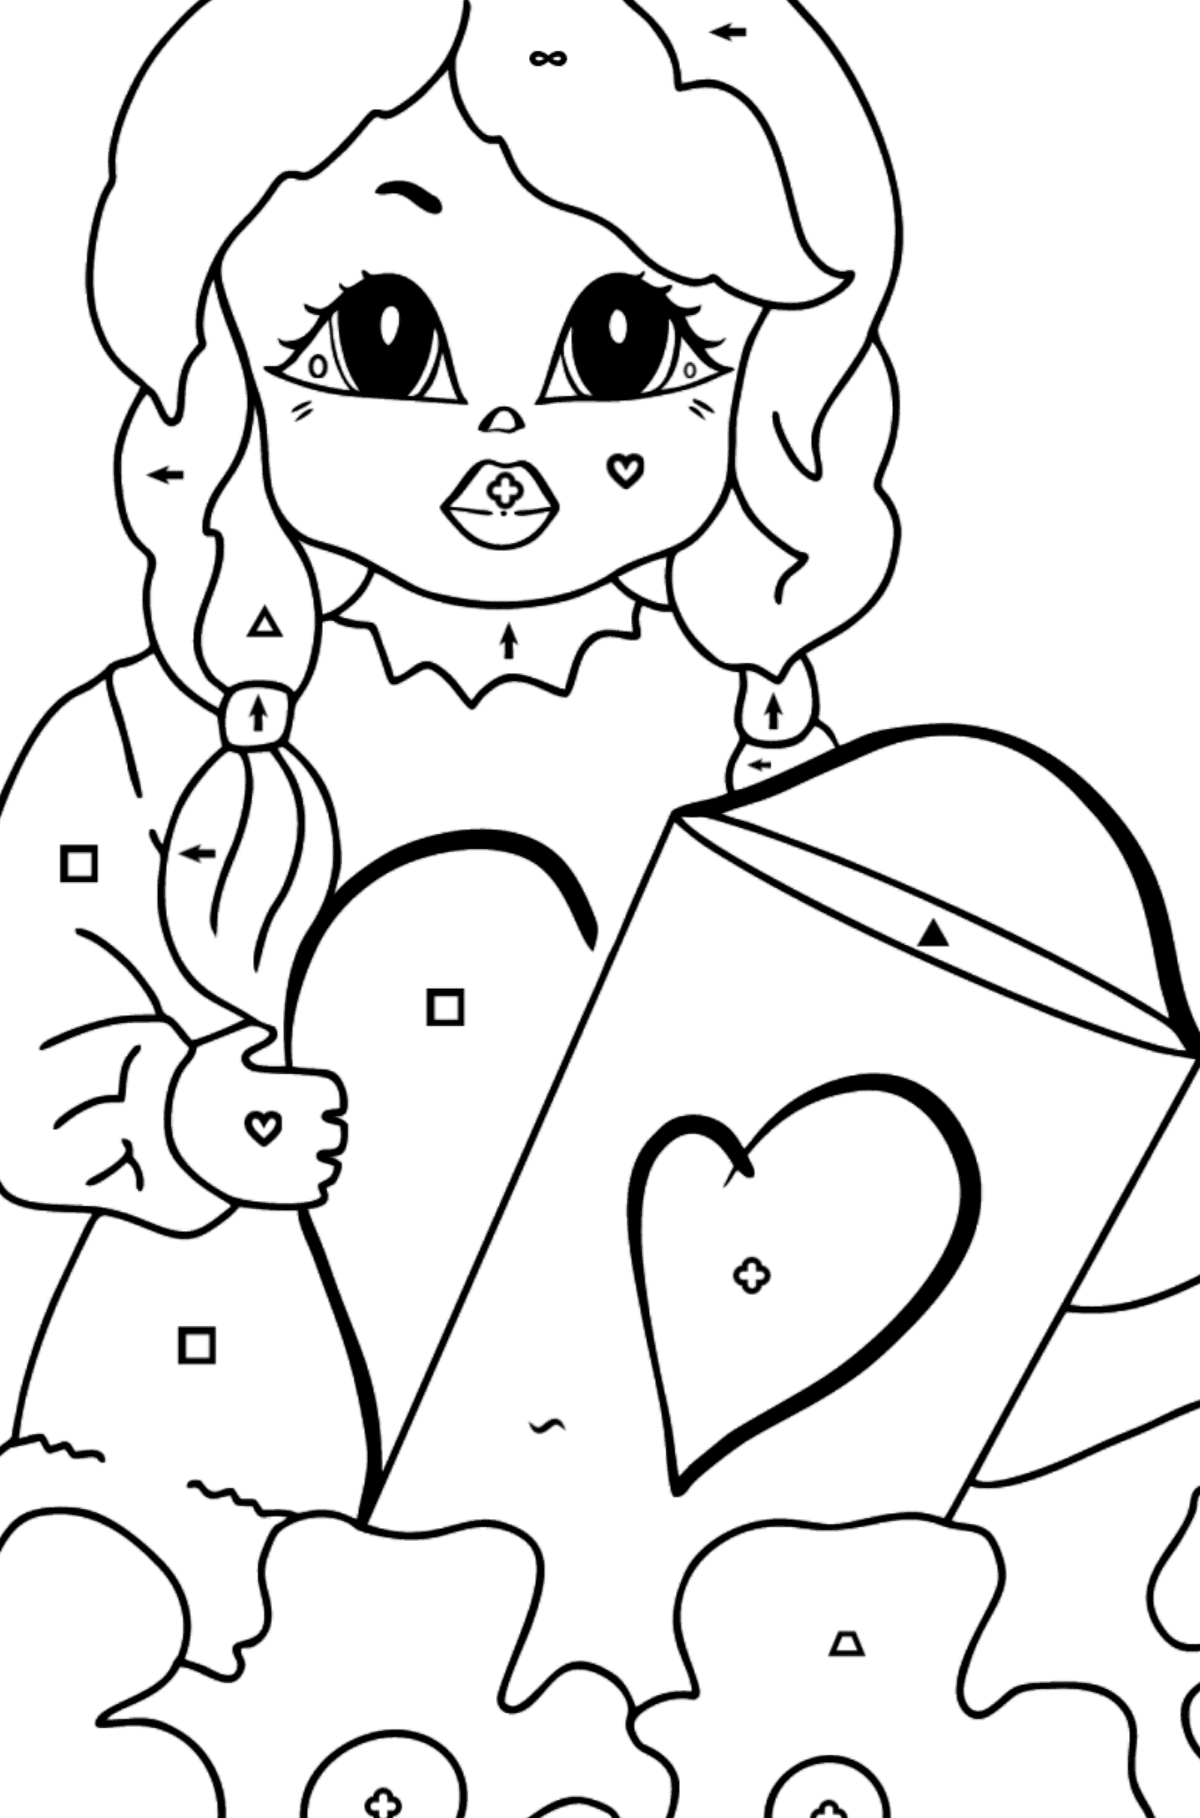 Coloring Page - A Princess with a Watering Can - Coloring by Symbols and Geometric Shapes for Kids